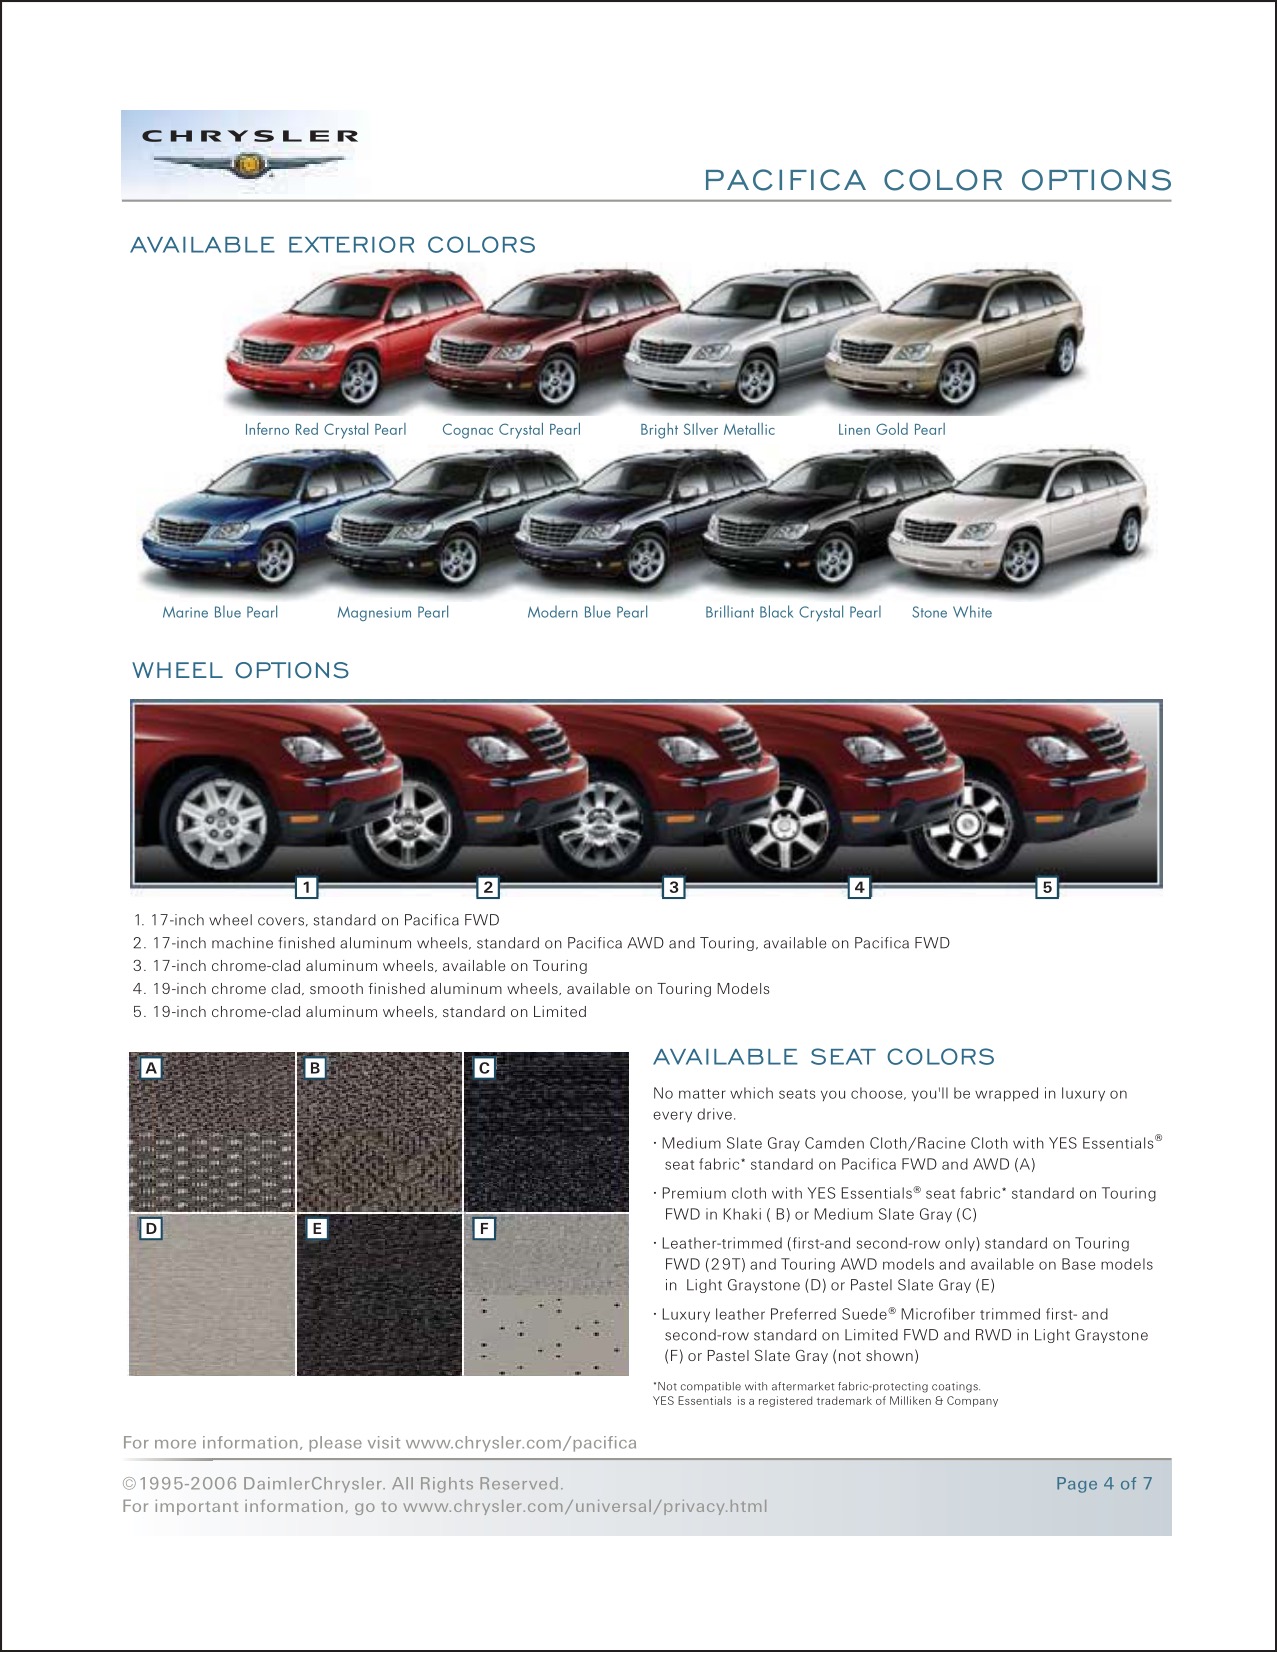 2007 Chrysler Pacifica Brochure Page 6